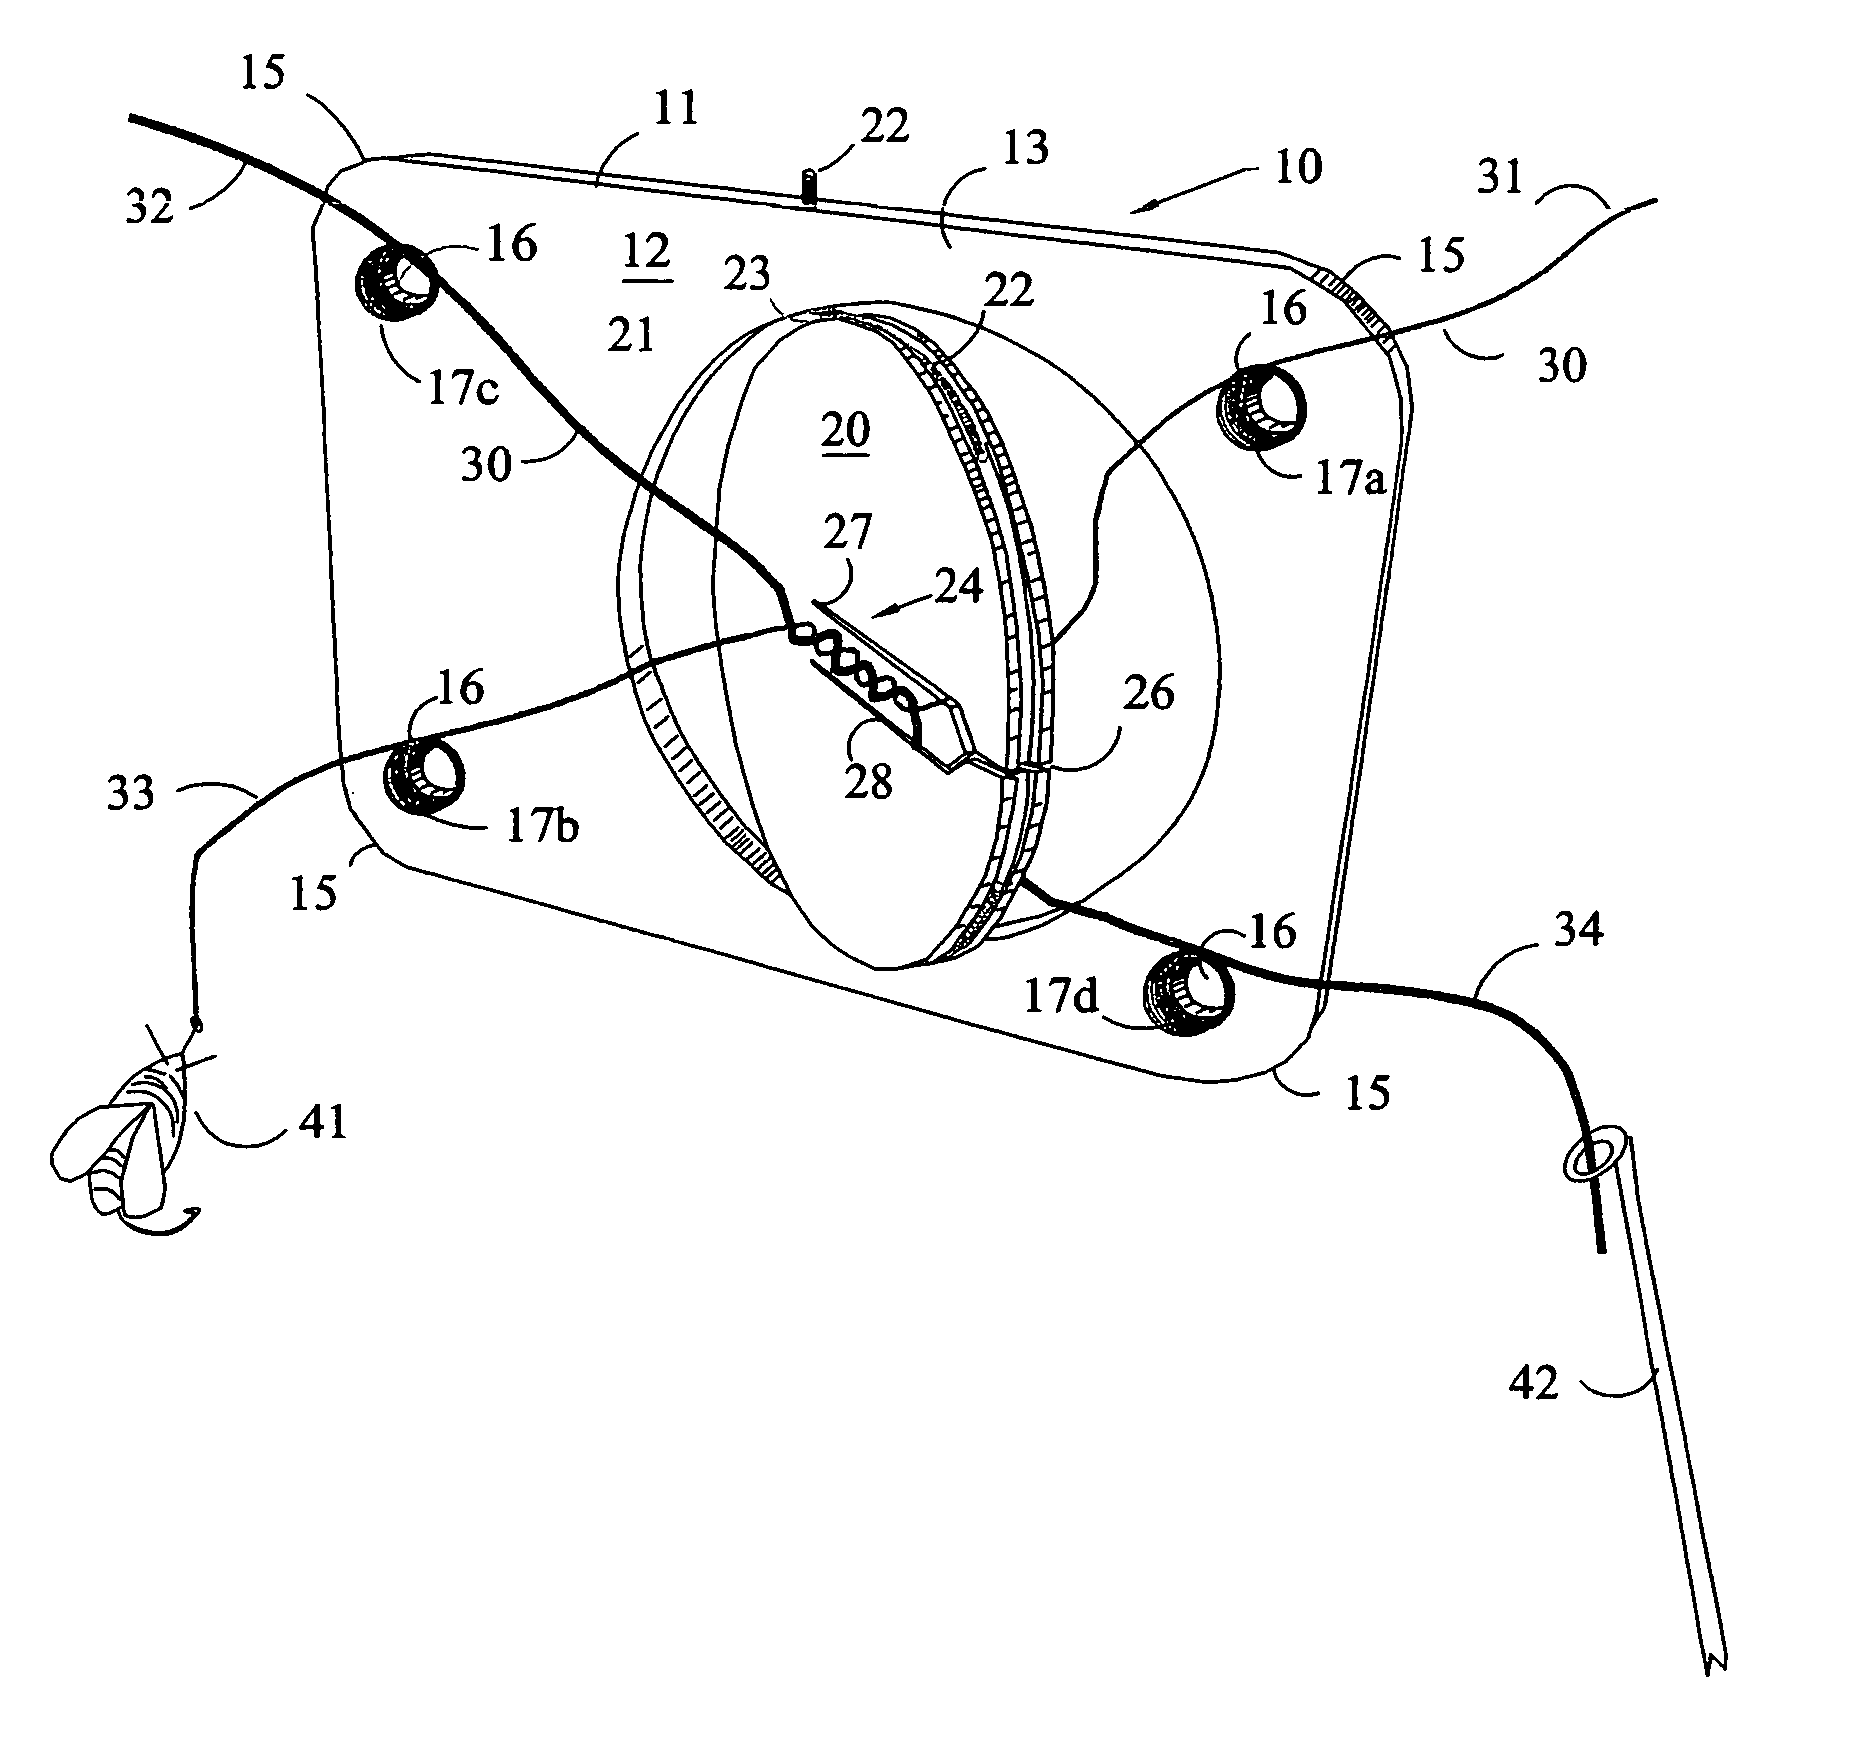 Knot-tying device for joining fishing leaders